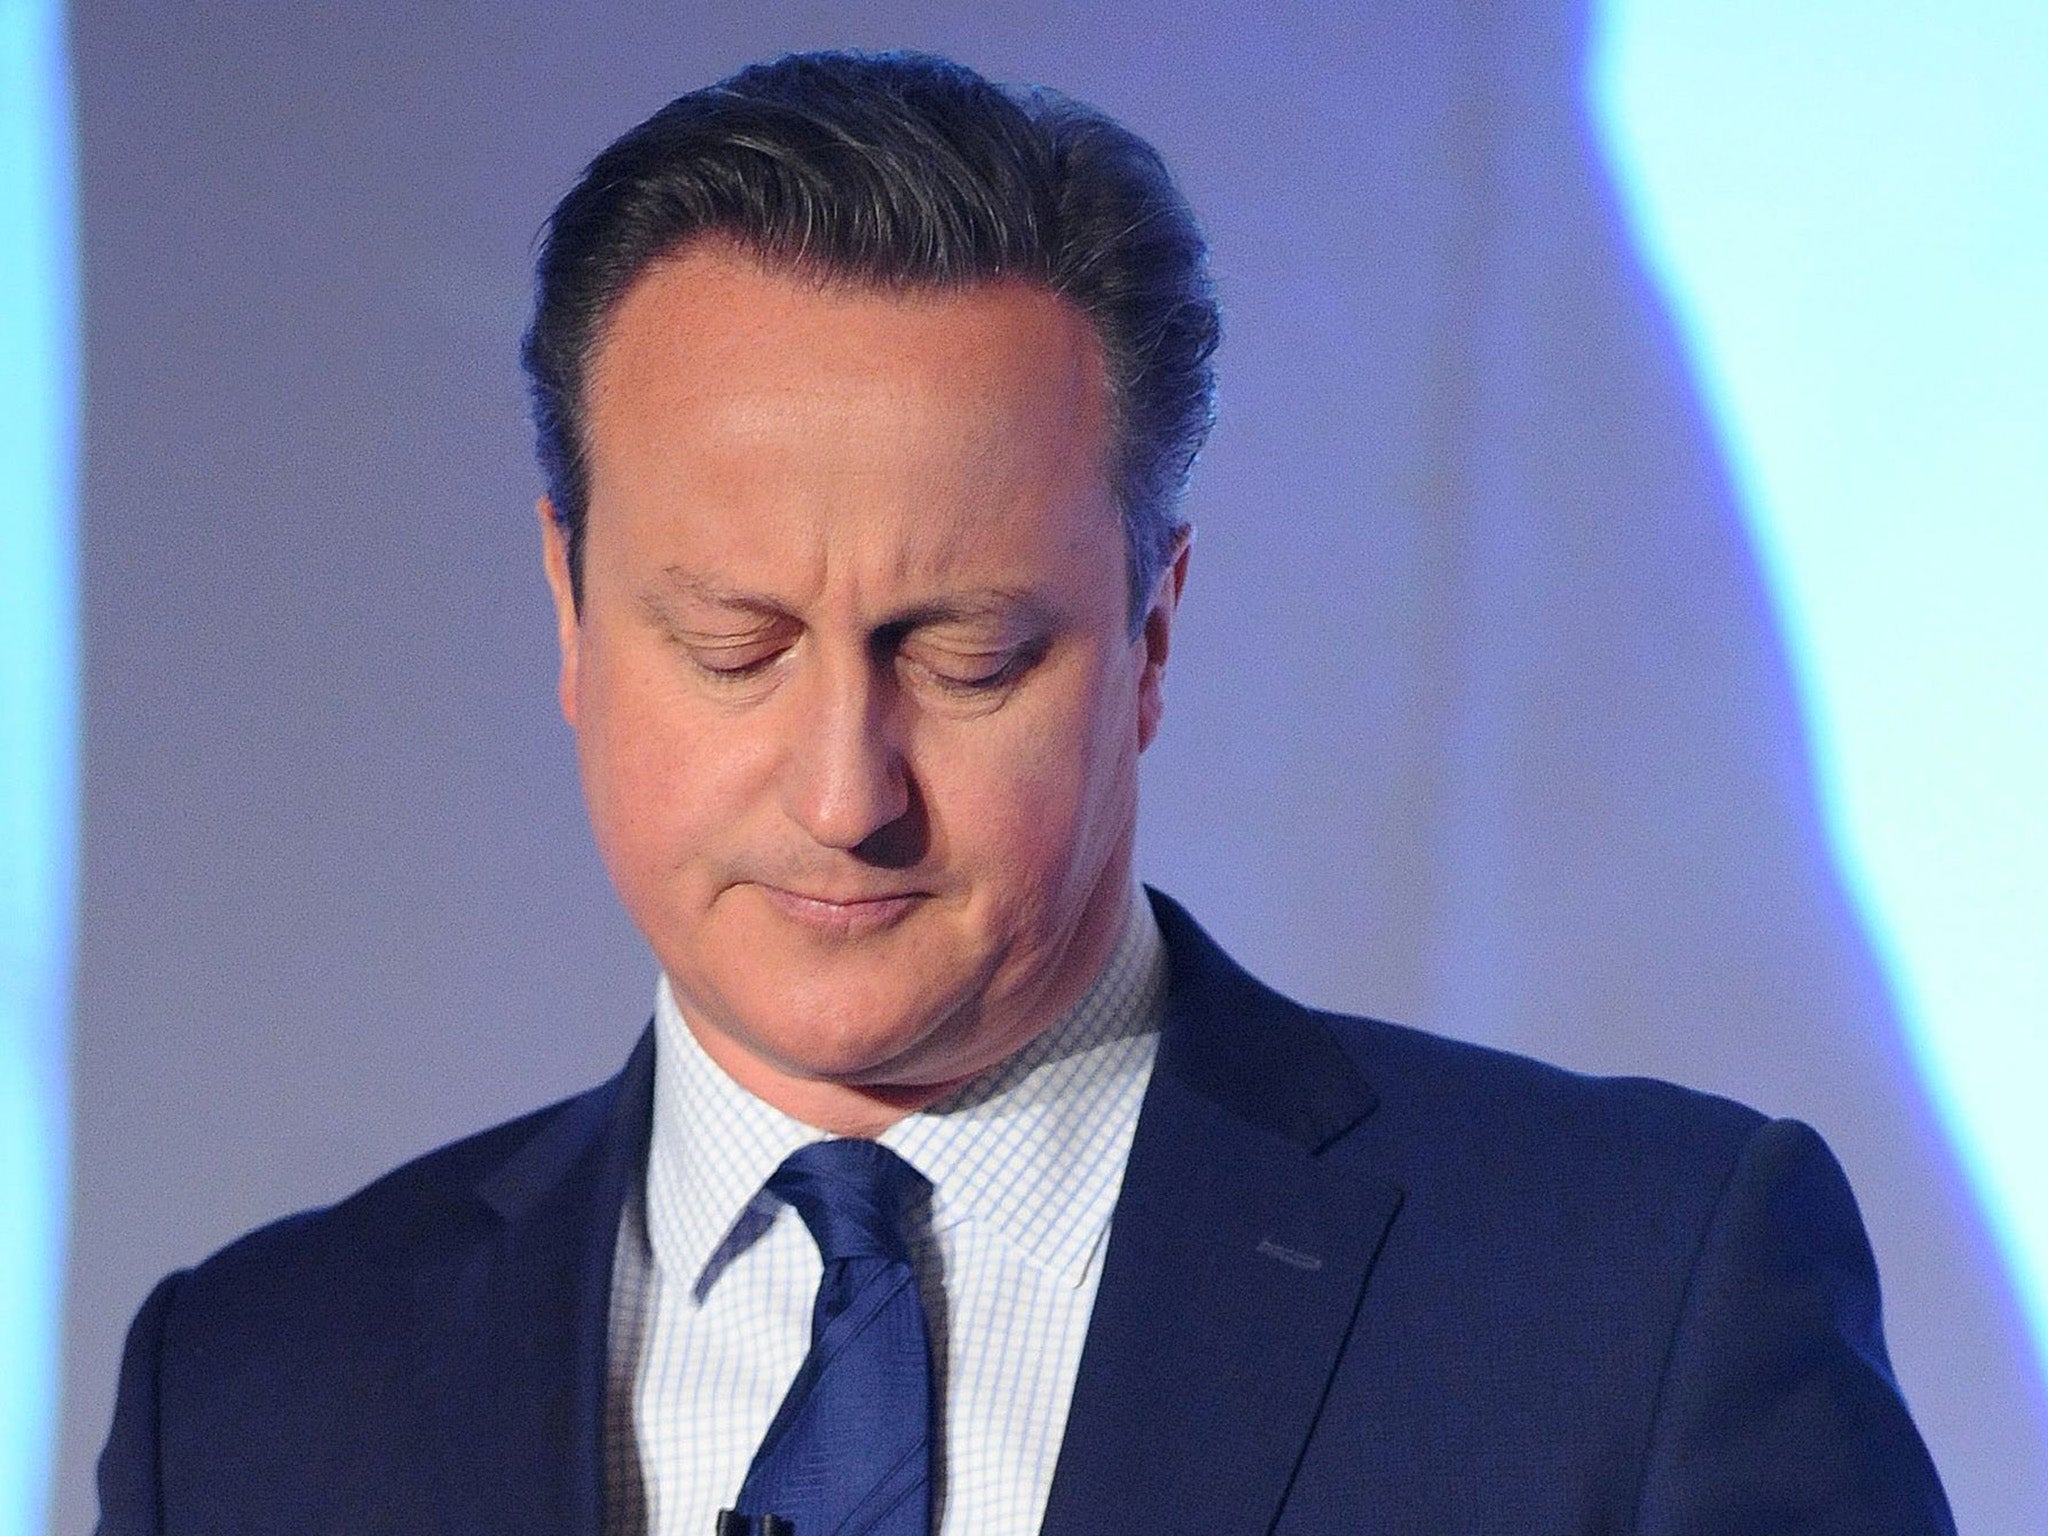 David Cameron addresses delegates during the Conservative party Spring Forum